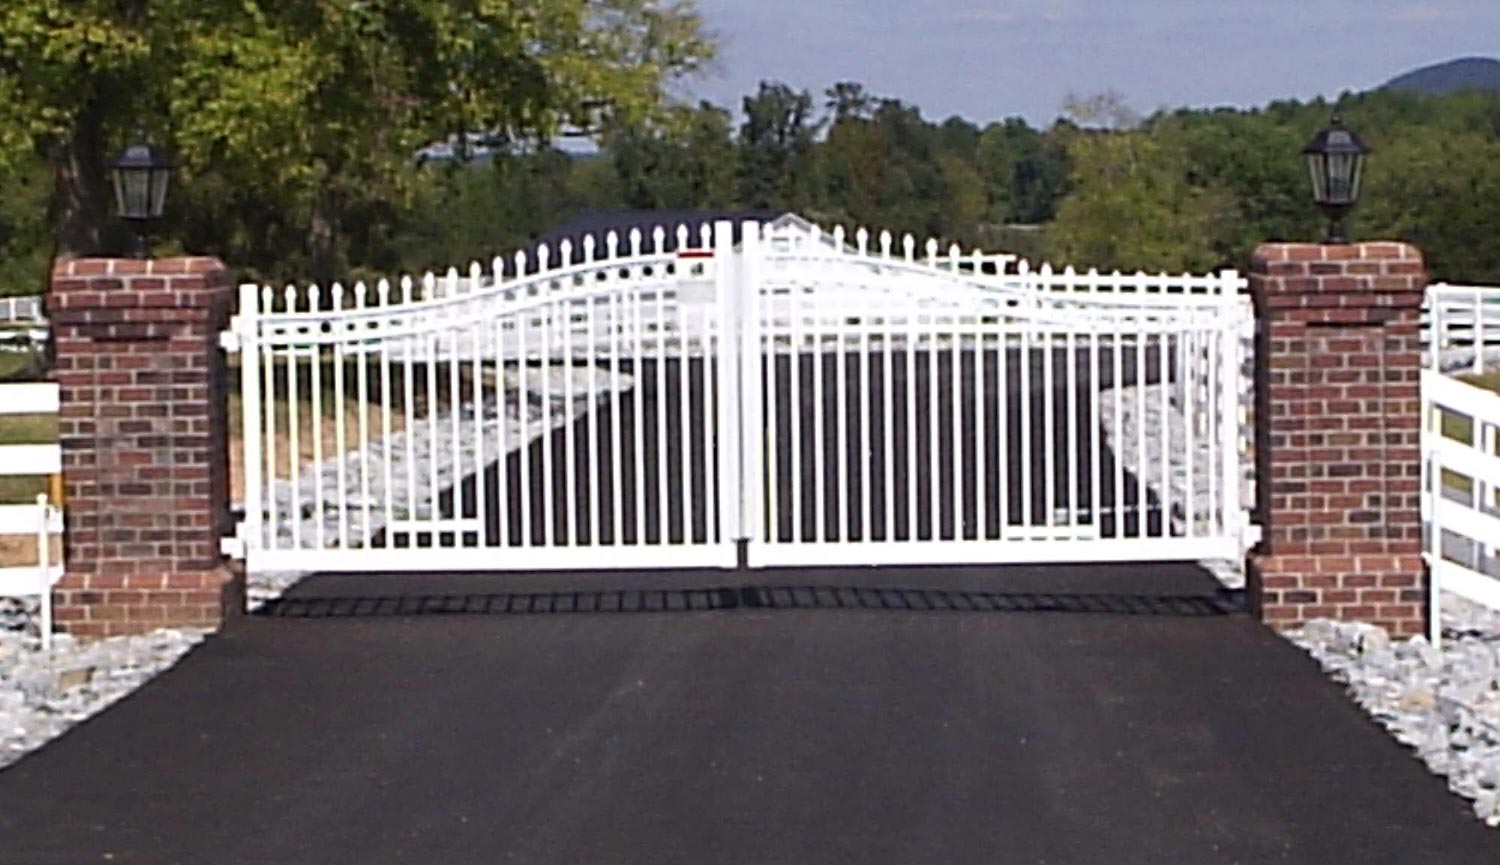 Gate entryways and gate operators